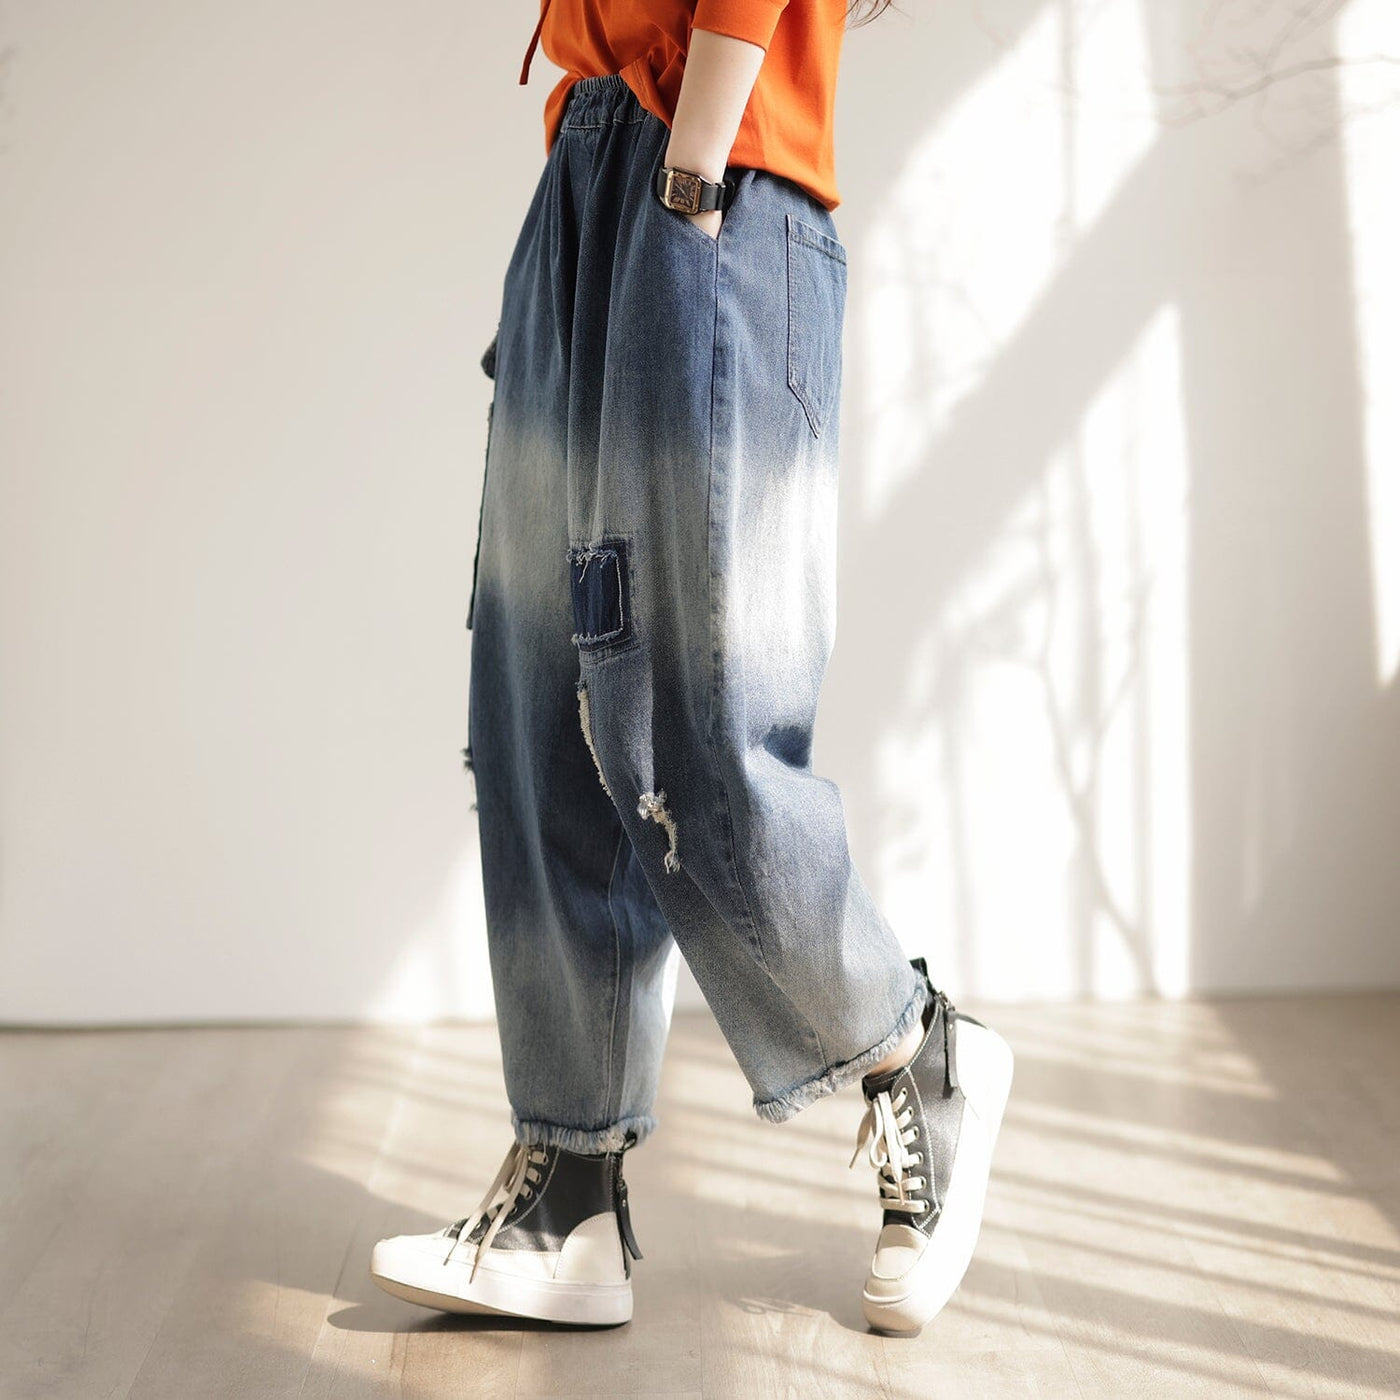 Women Spring Casual Ripped Patchwork Jeans Feb 2023 New Arrival 